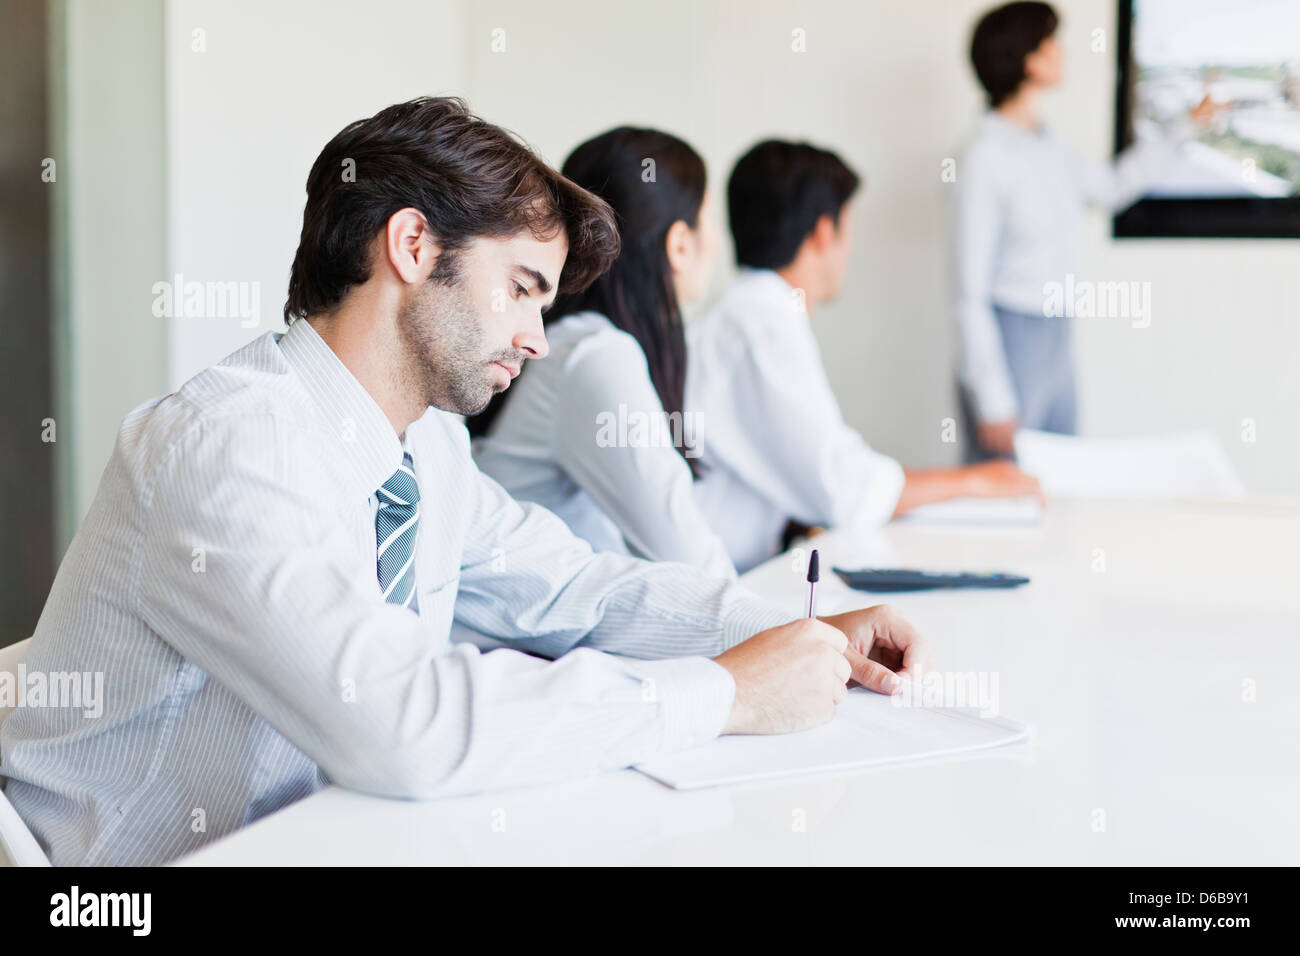 Businessman taking notes in meeting Stock Photo